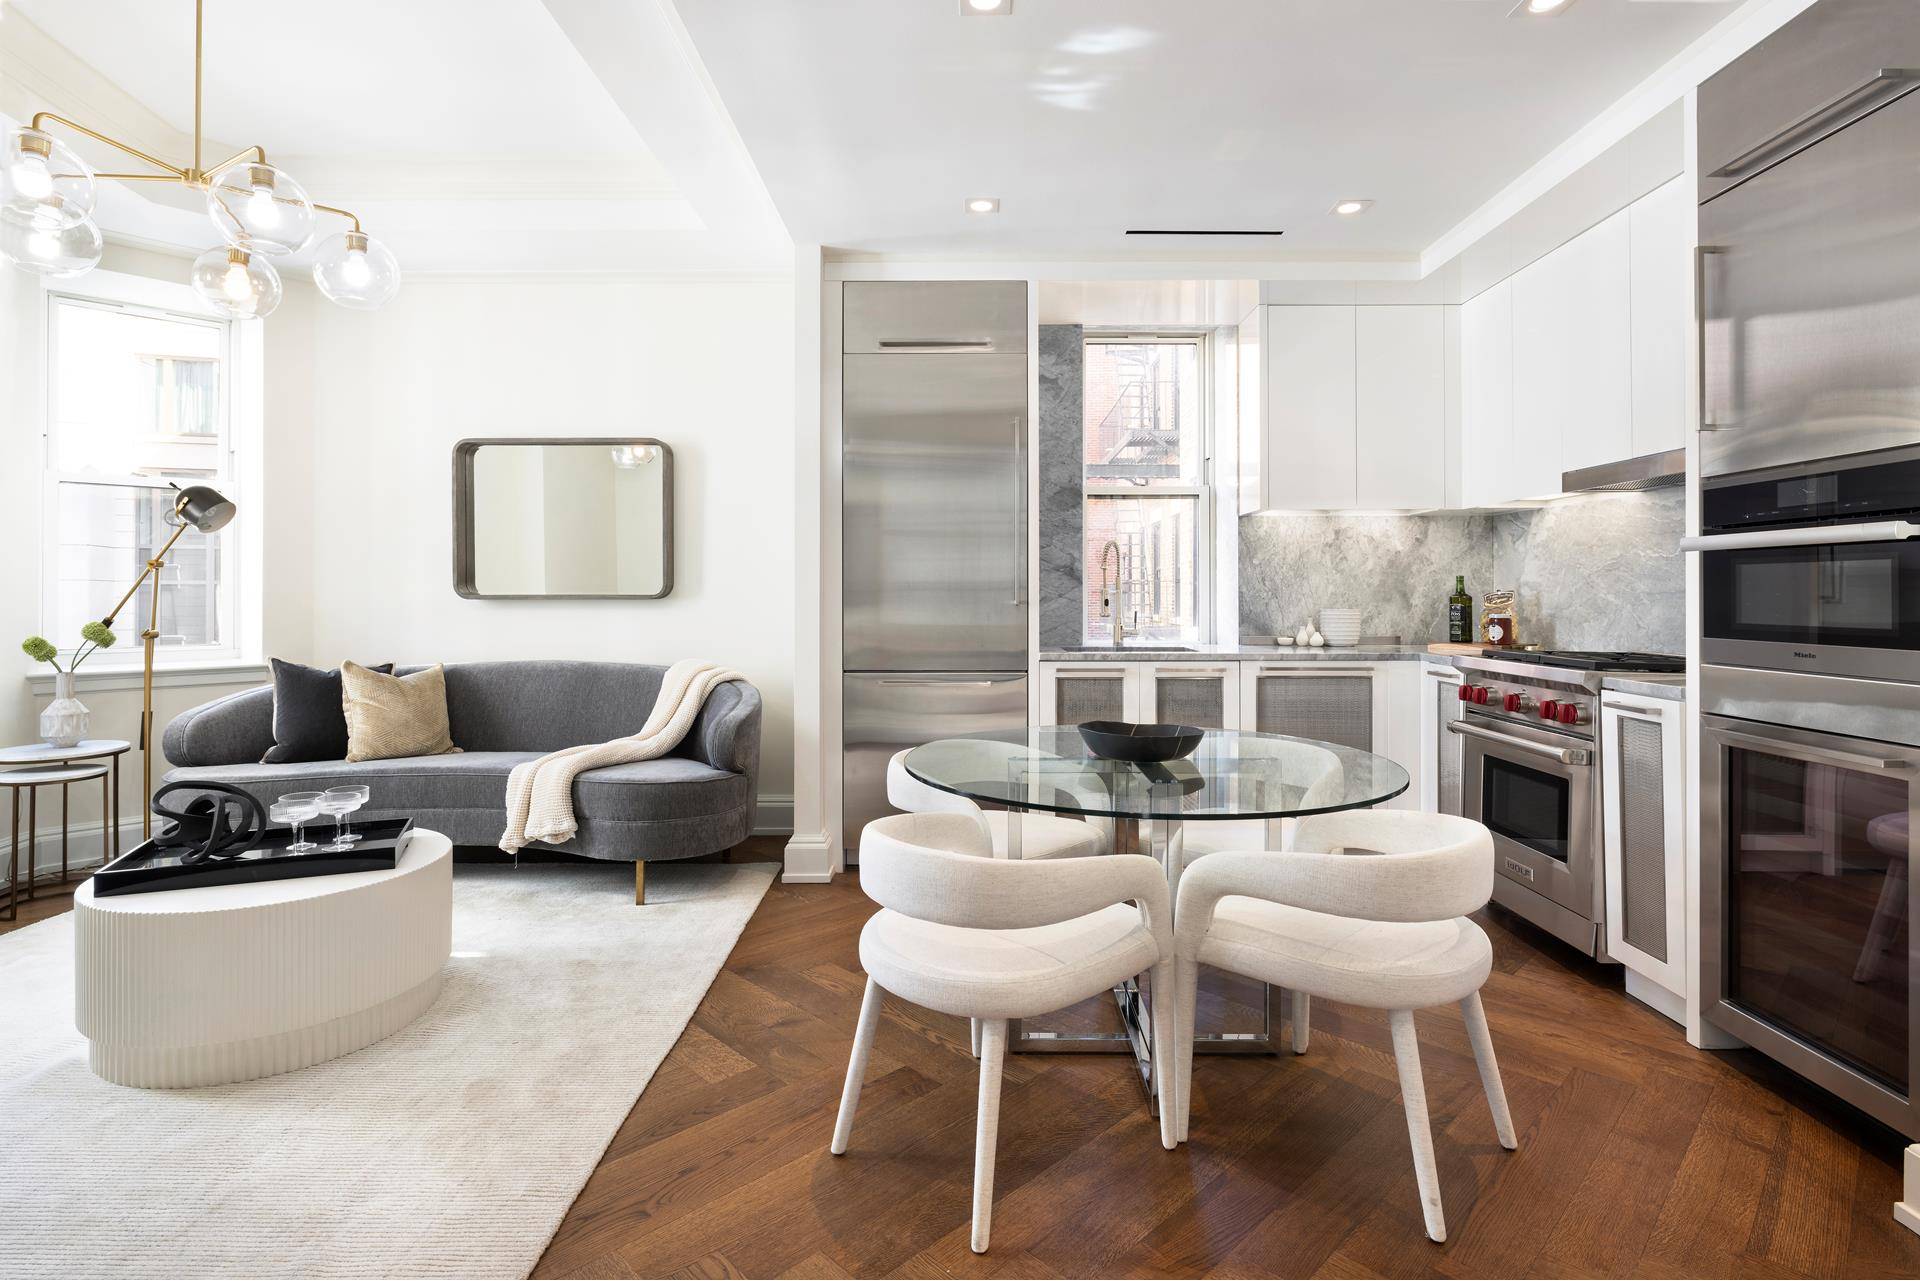 This split two bedroom, two bathroom residence is located in the amenity filled Chatsworth, a renovated and upgraded Prewar gem in Manhattan's coveted Upper West Side neighborhood.